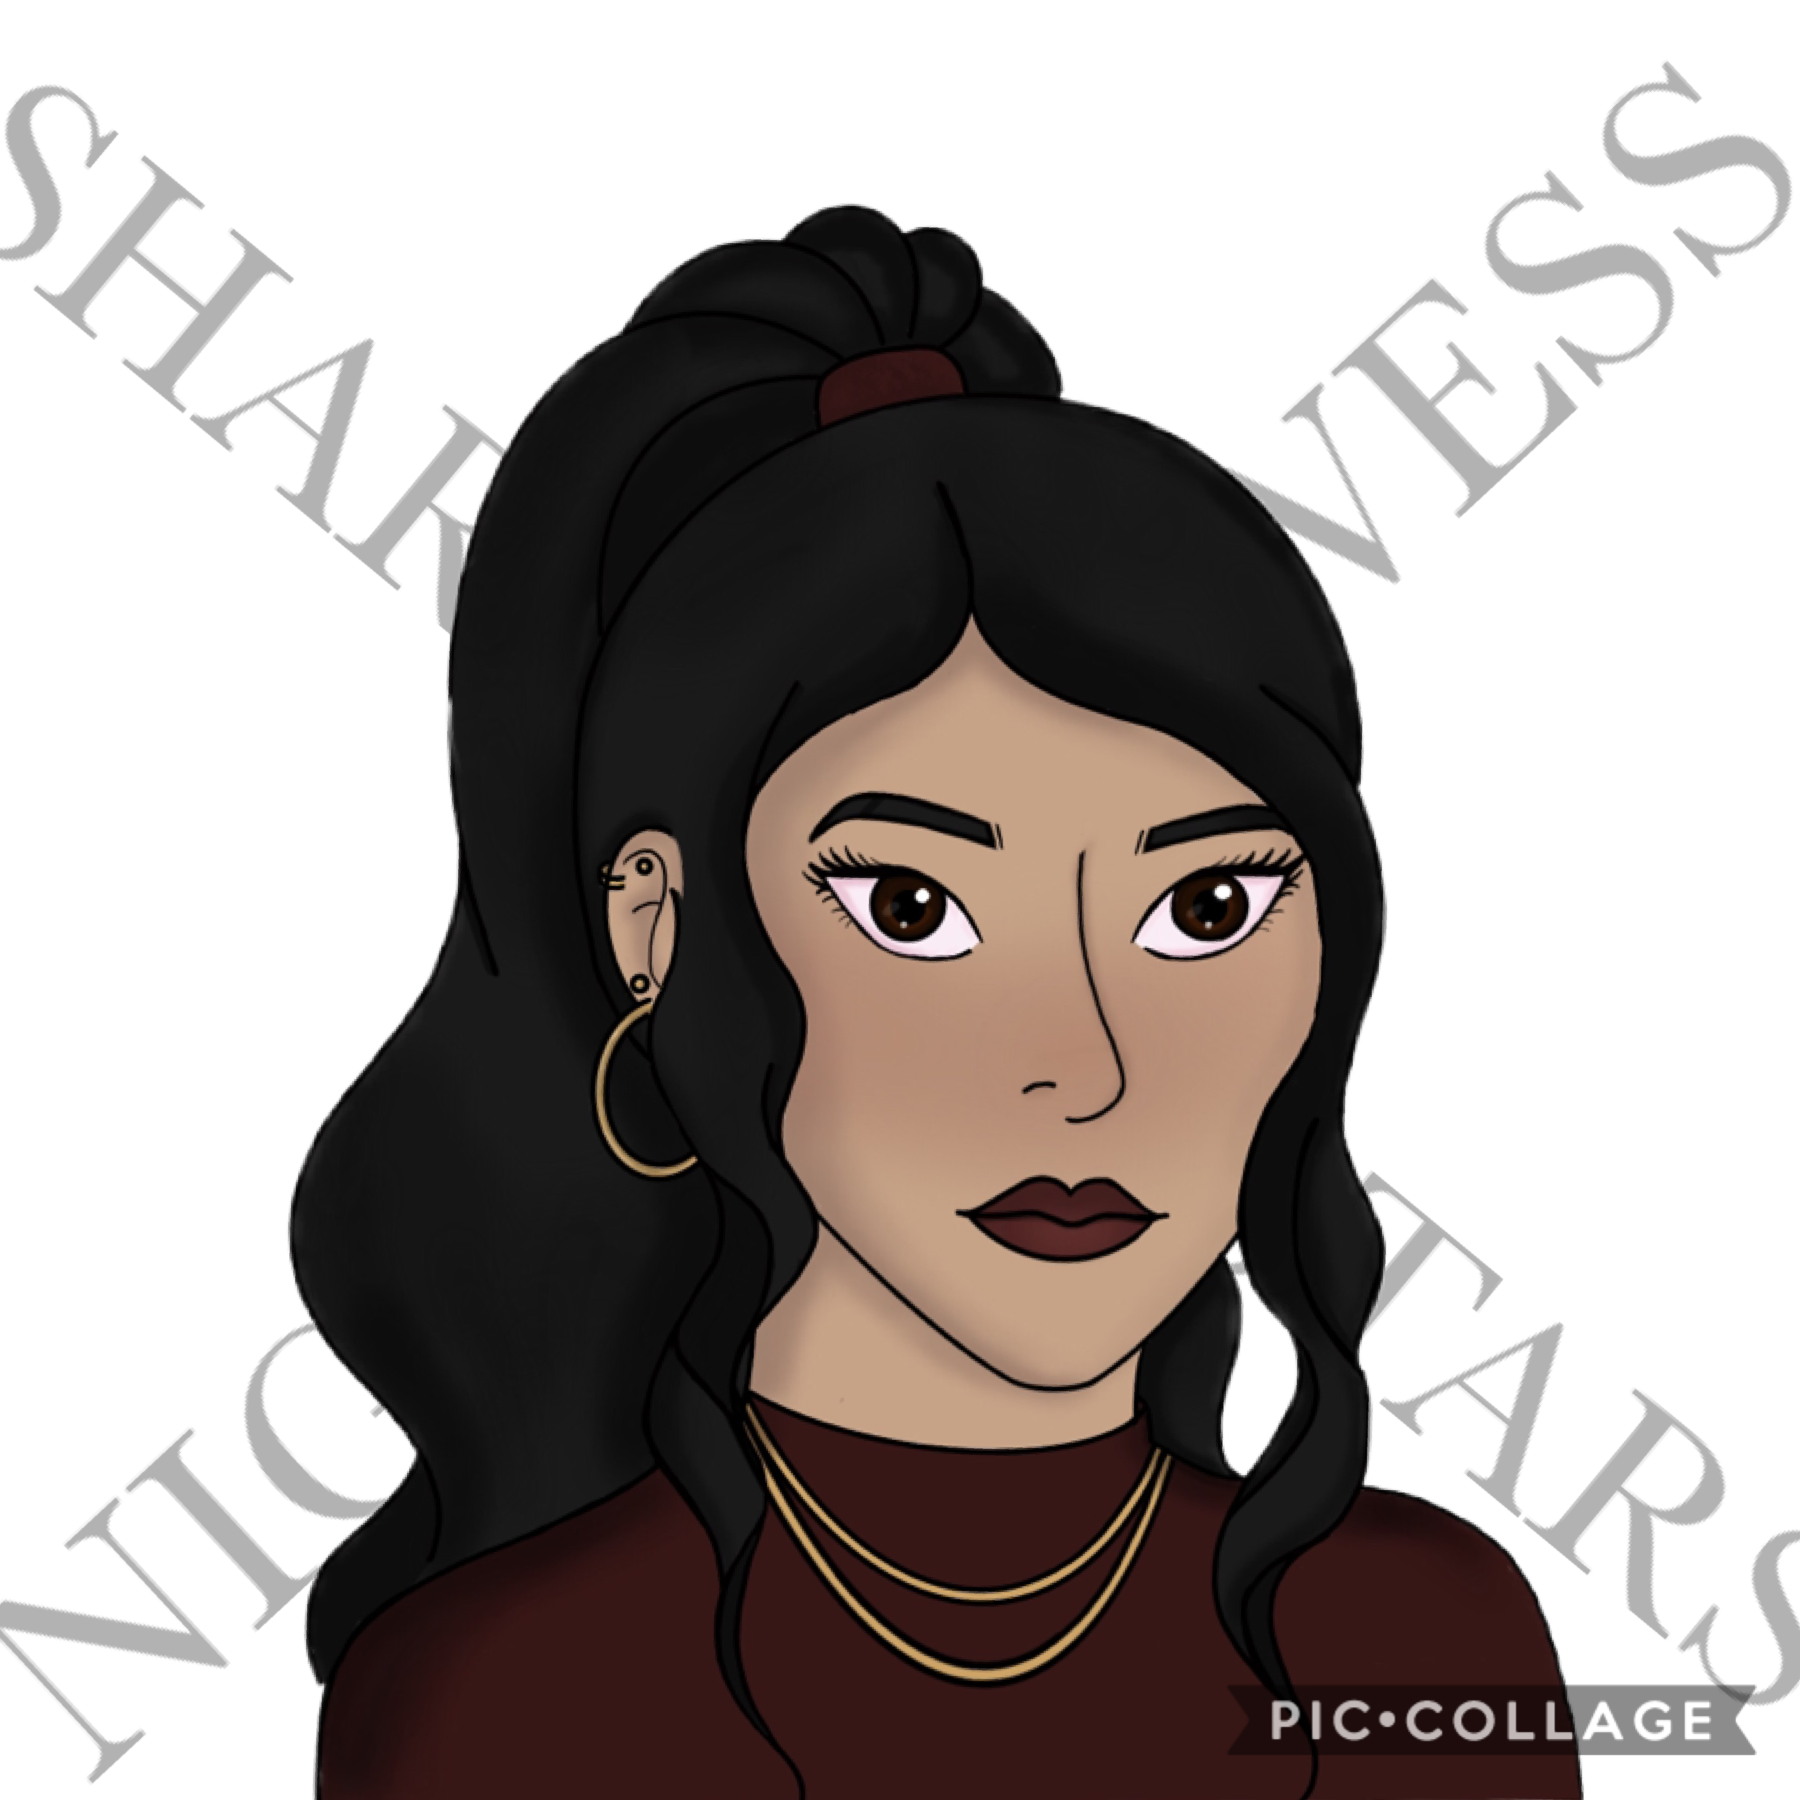 Preview of some art I did for a collage? Or maybe I’ll just post it when I have a better background. Anyways, this is a character for a potential urban fantasy comic and her name is Reyna. More to come when I post on my main :)